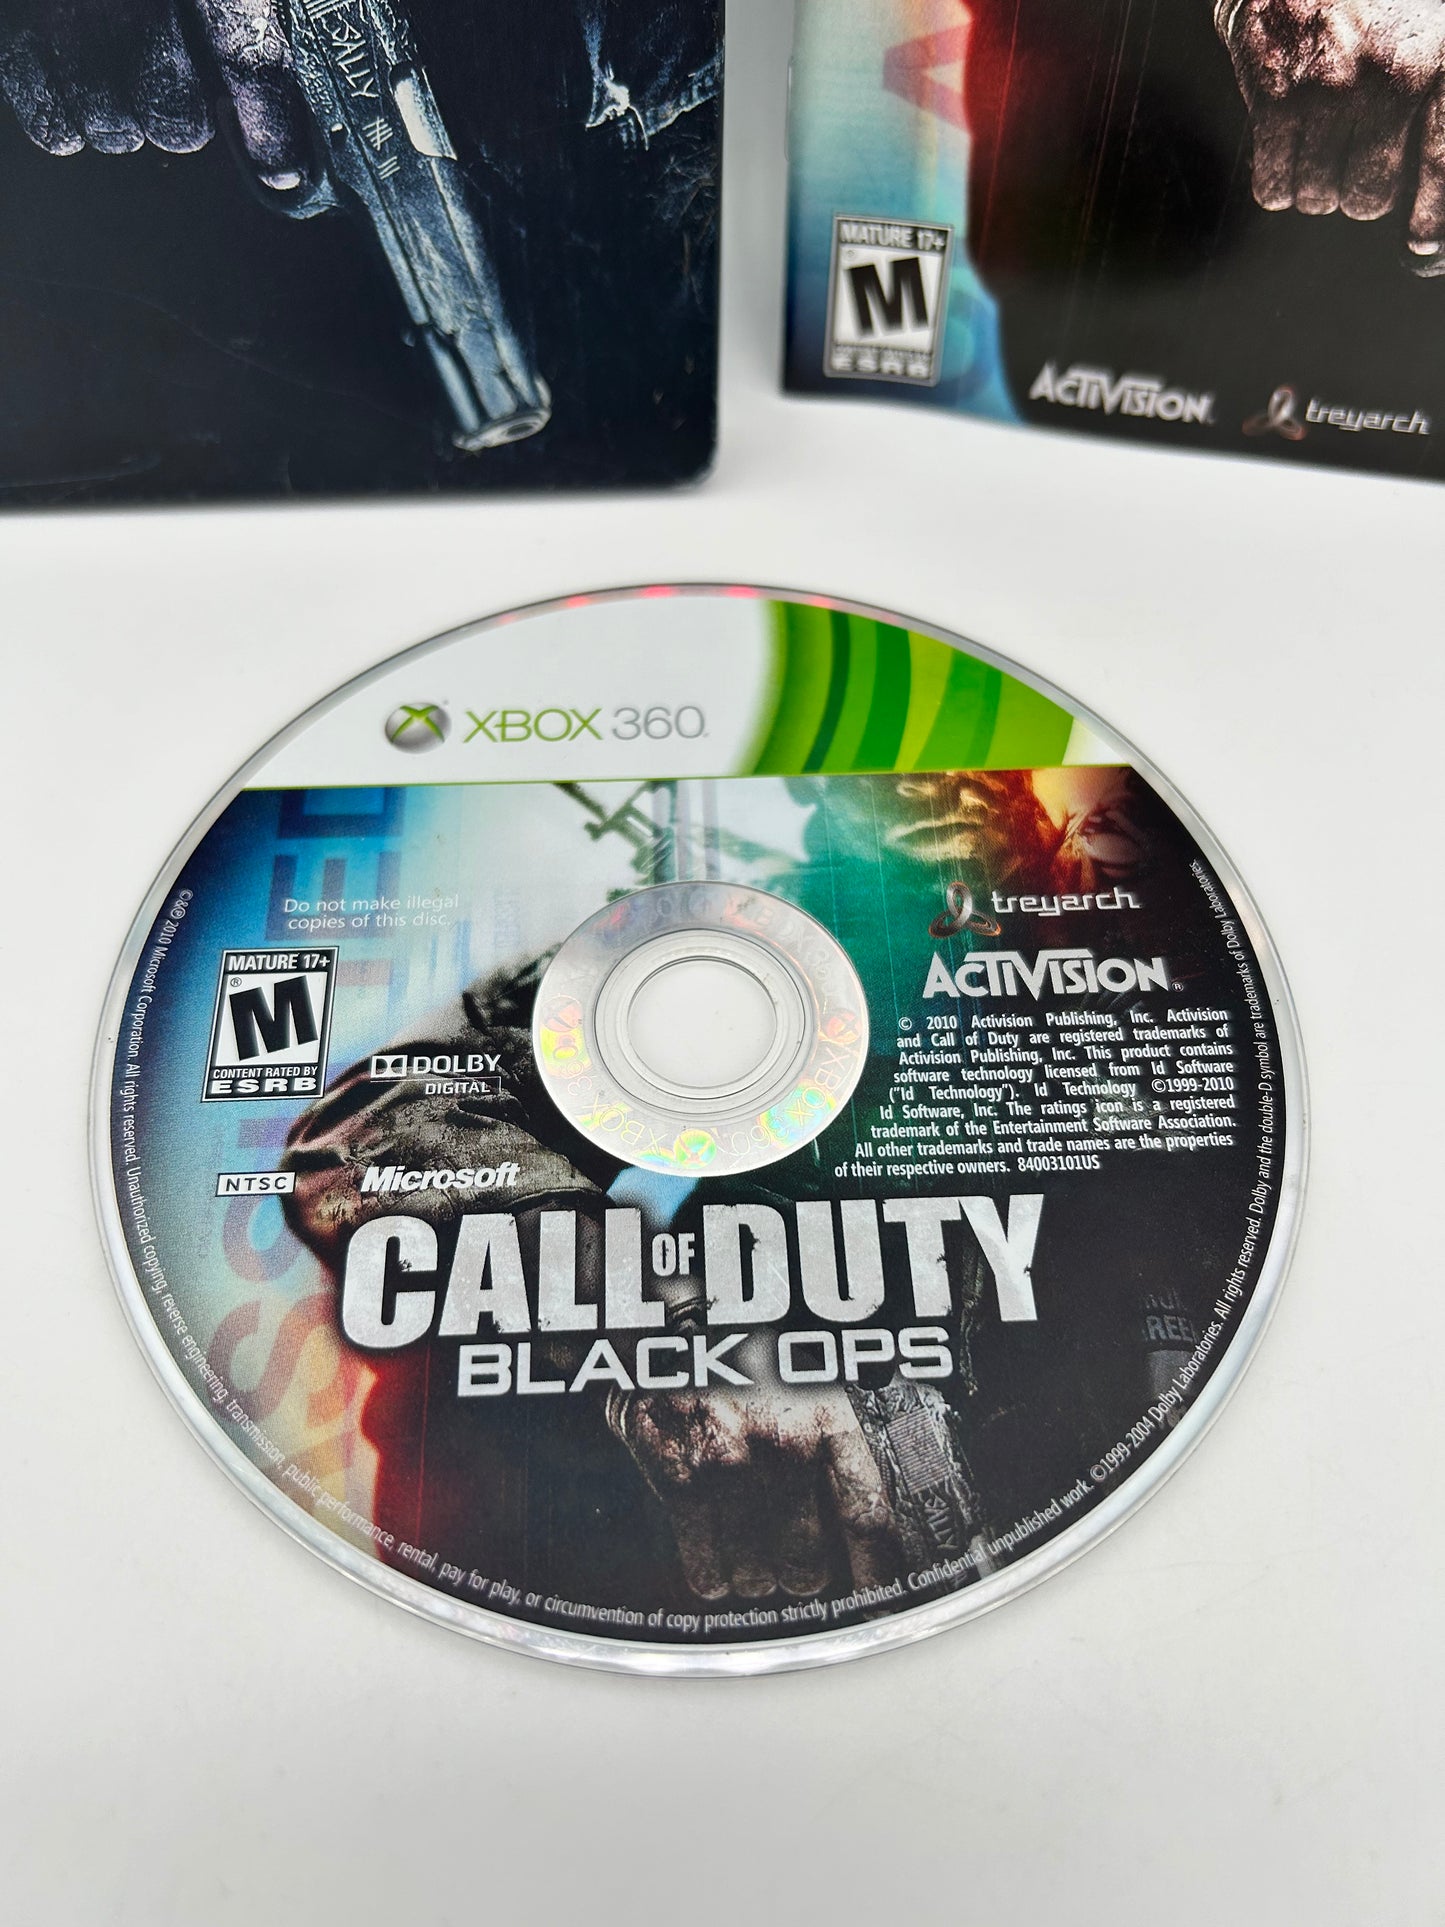 MiCROSOFT XBOX 360 | CALL OF DUTY BLACK OPS | HARDENED EDiTiON